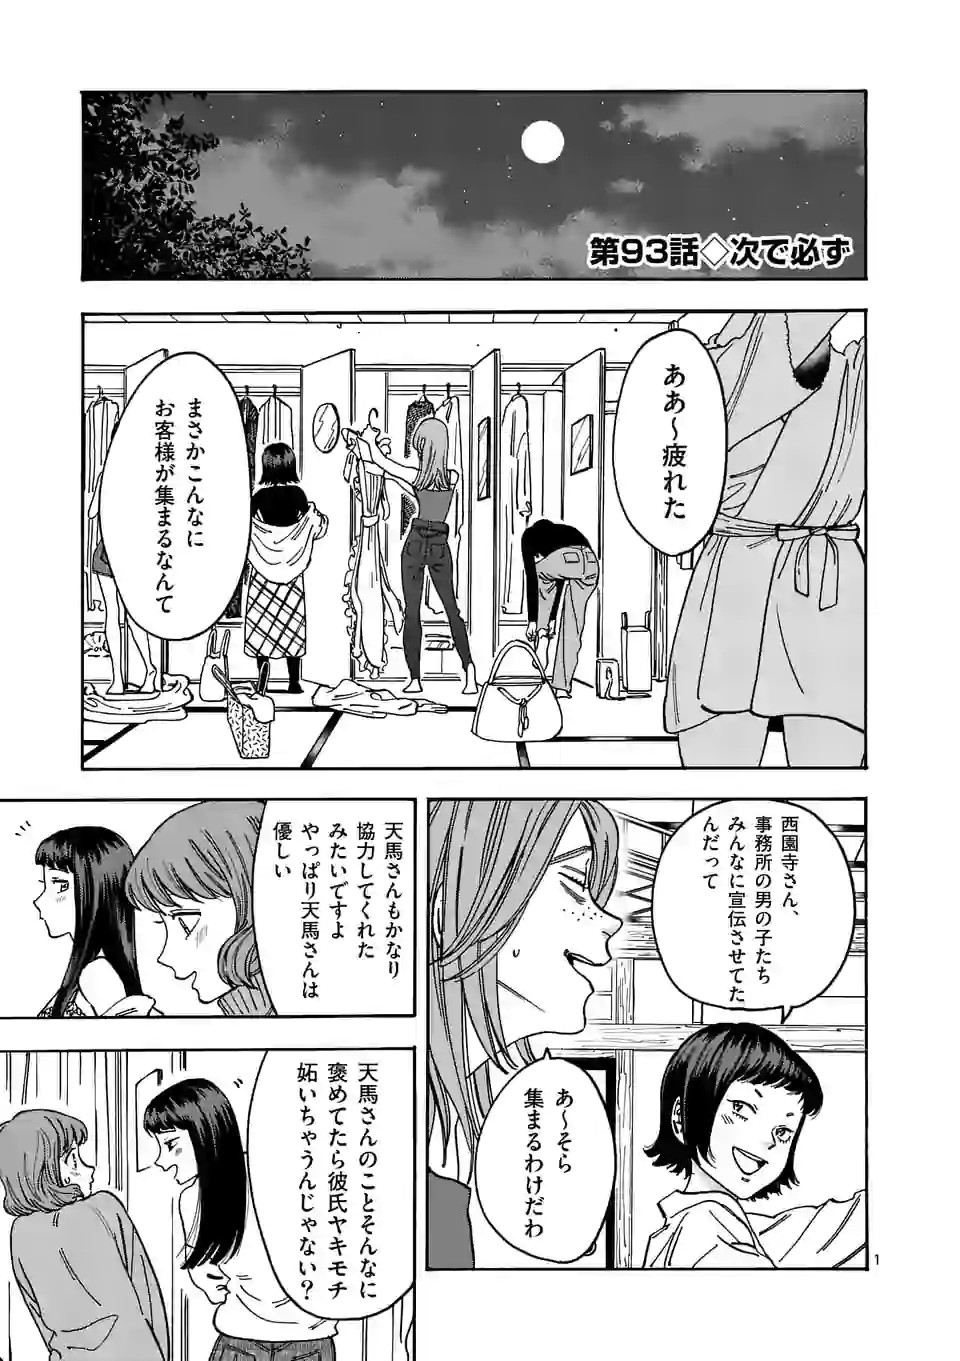 Promise Cinderella - Chapter 93 - Page 1